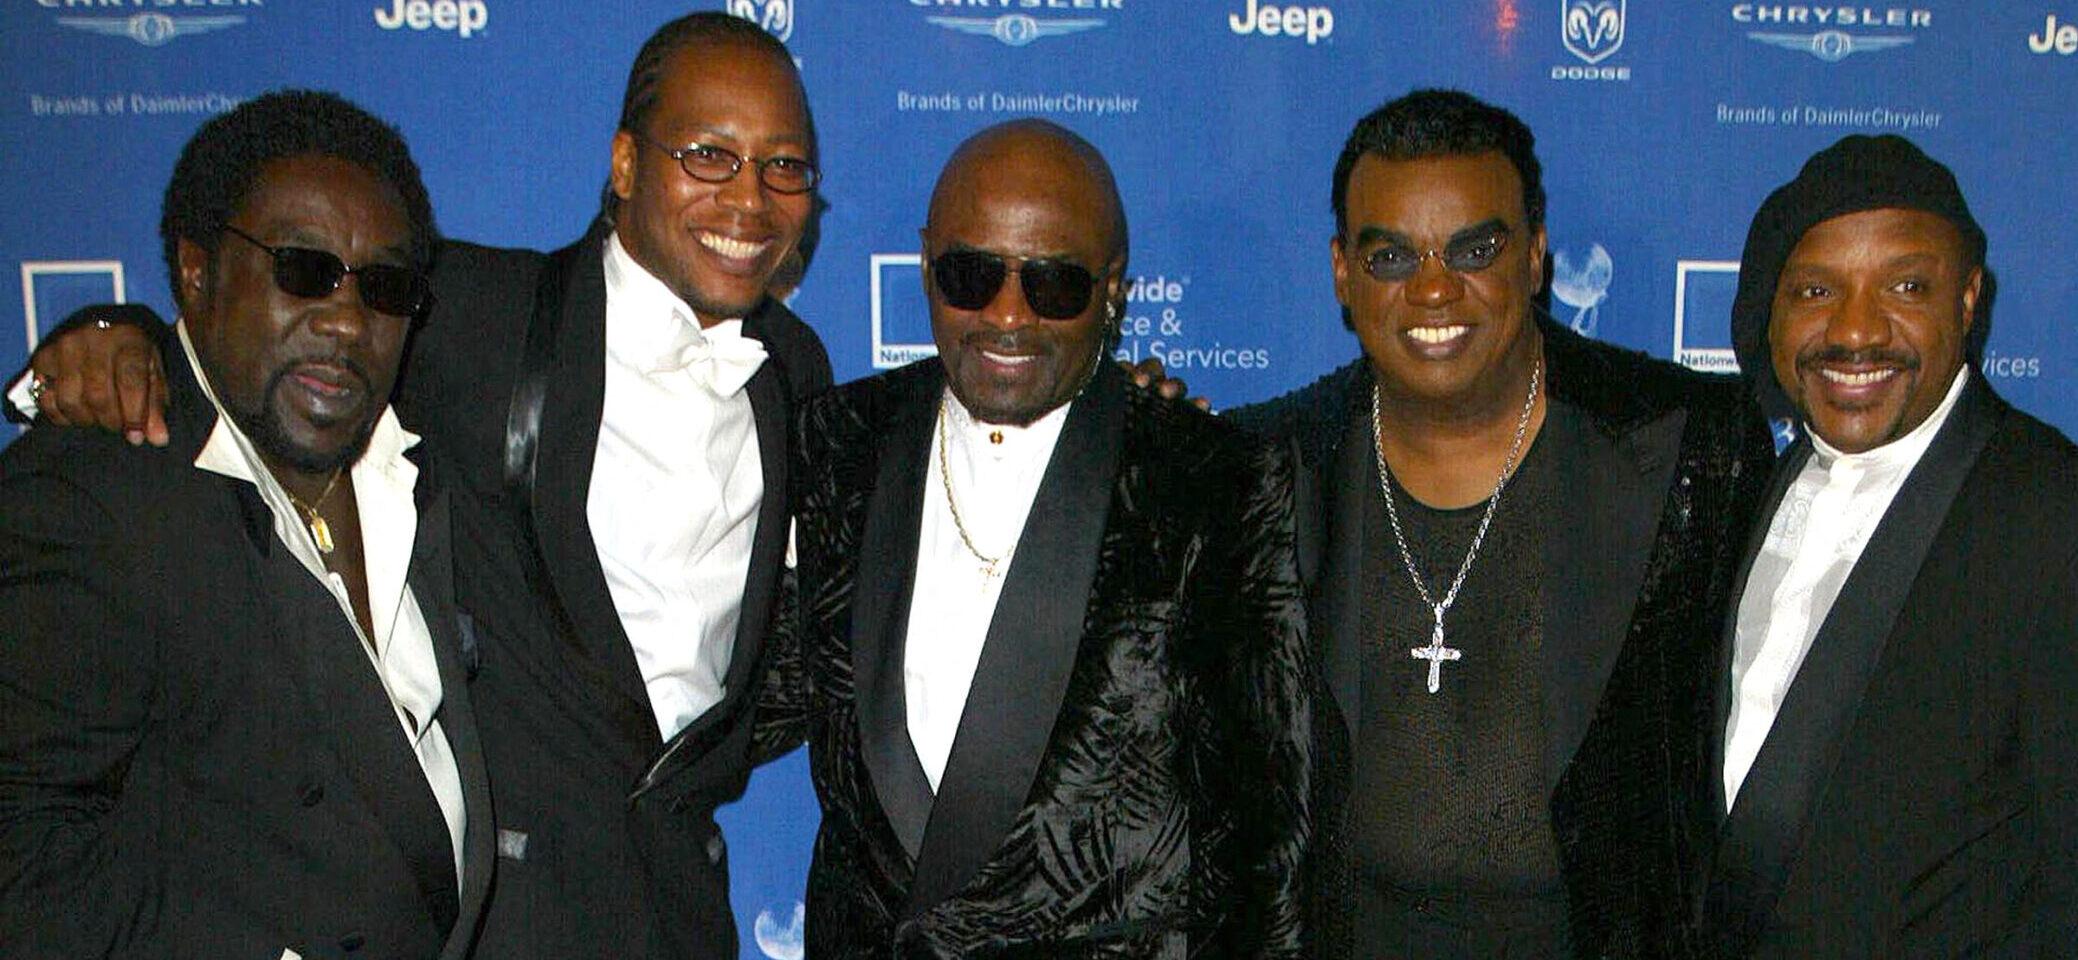 Rudolph Isley, Isley Brothers Founder Has Passed Away At The Age Of 84